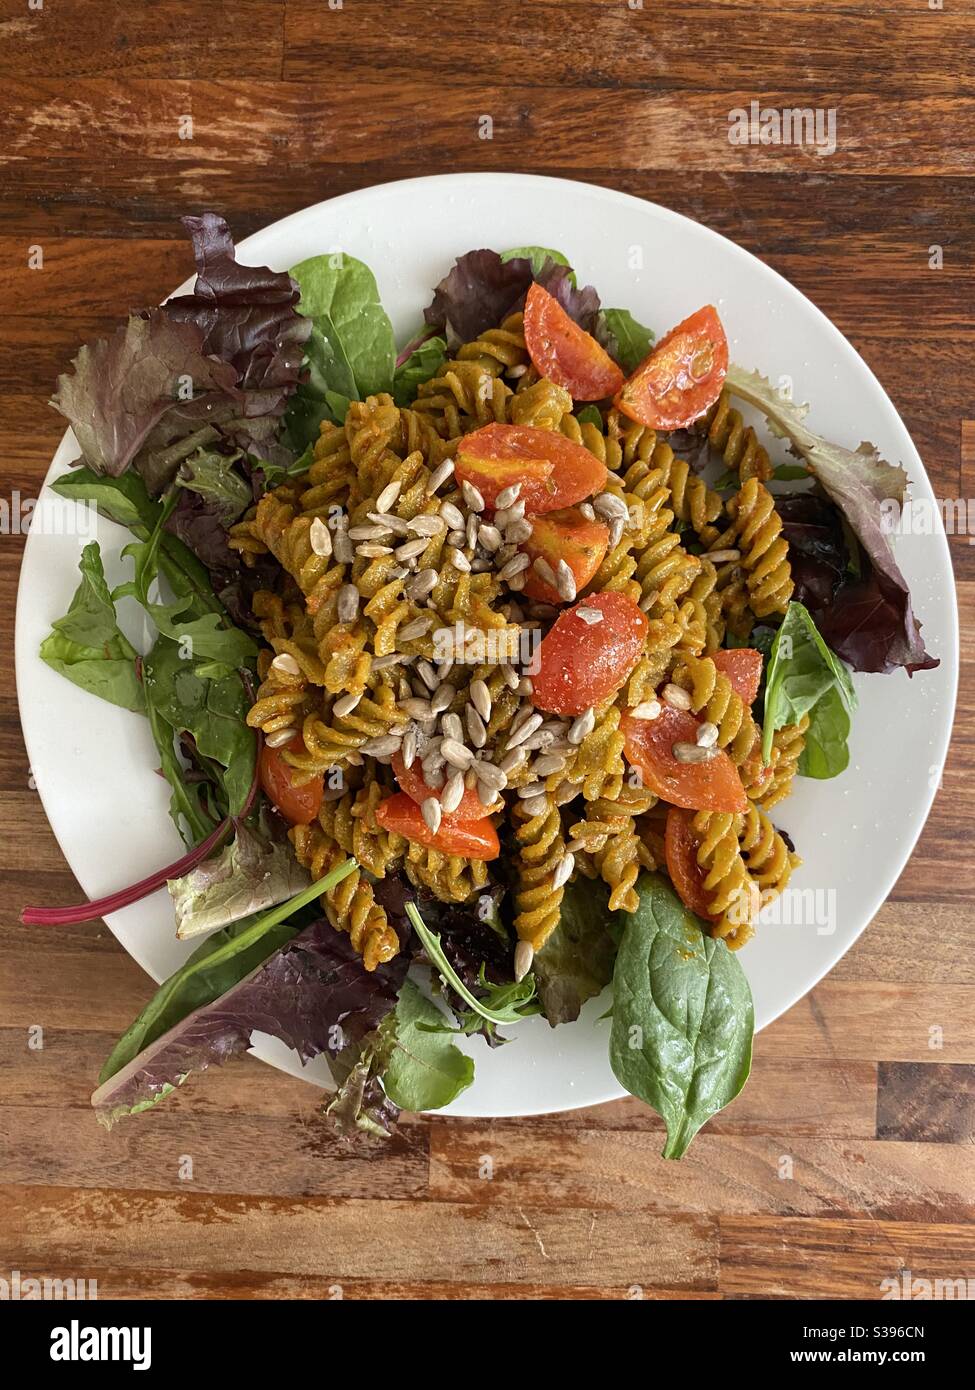 Pea protein pasta in vegan pesto with side salad and tomatoes, sprinkled with sunflower seeds Stock Photo